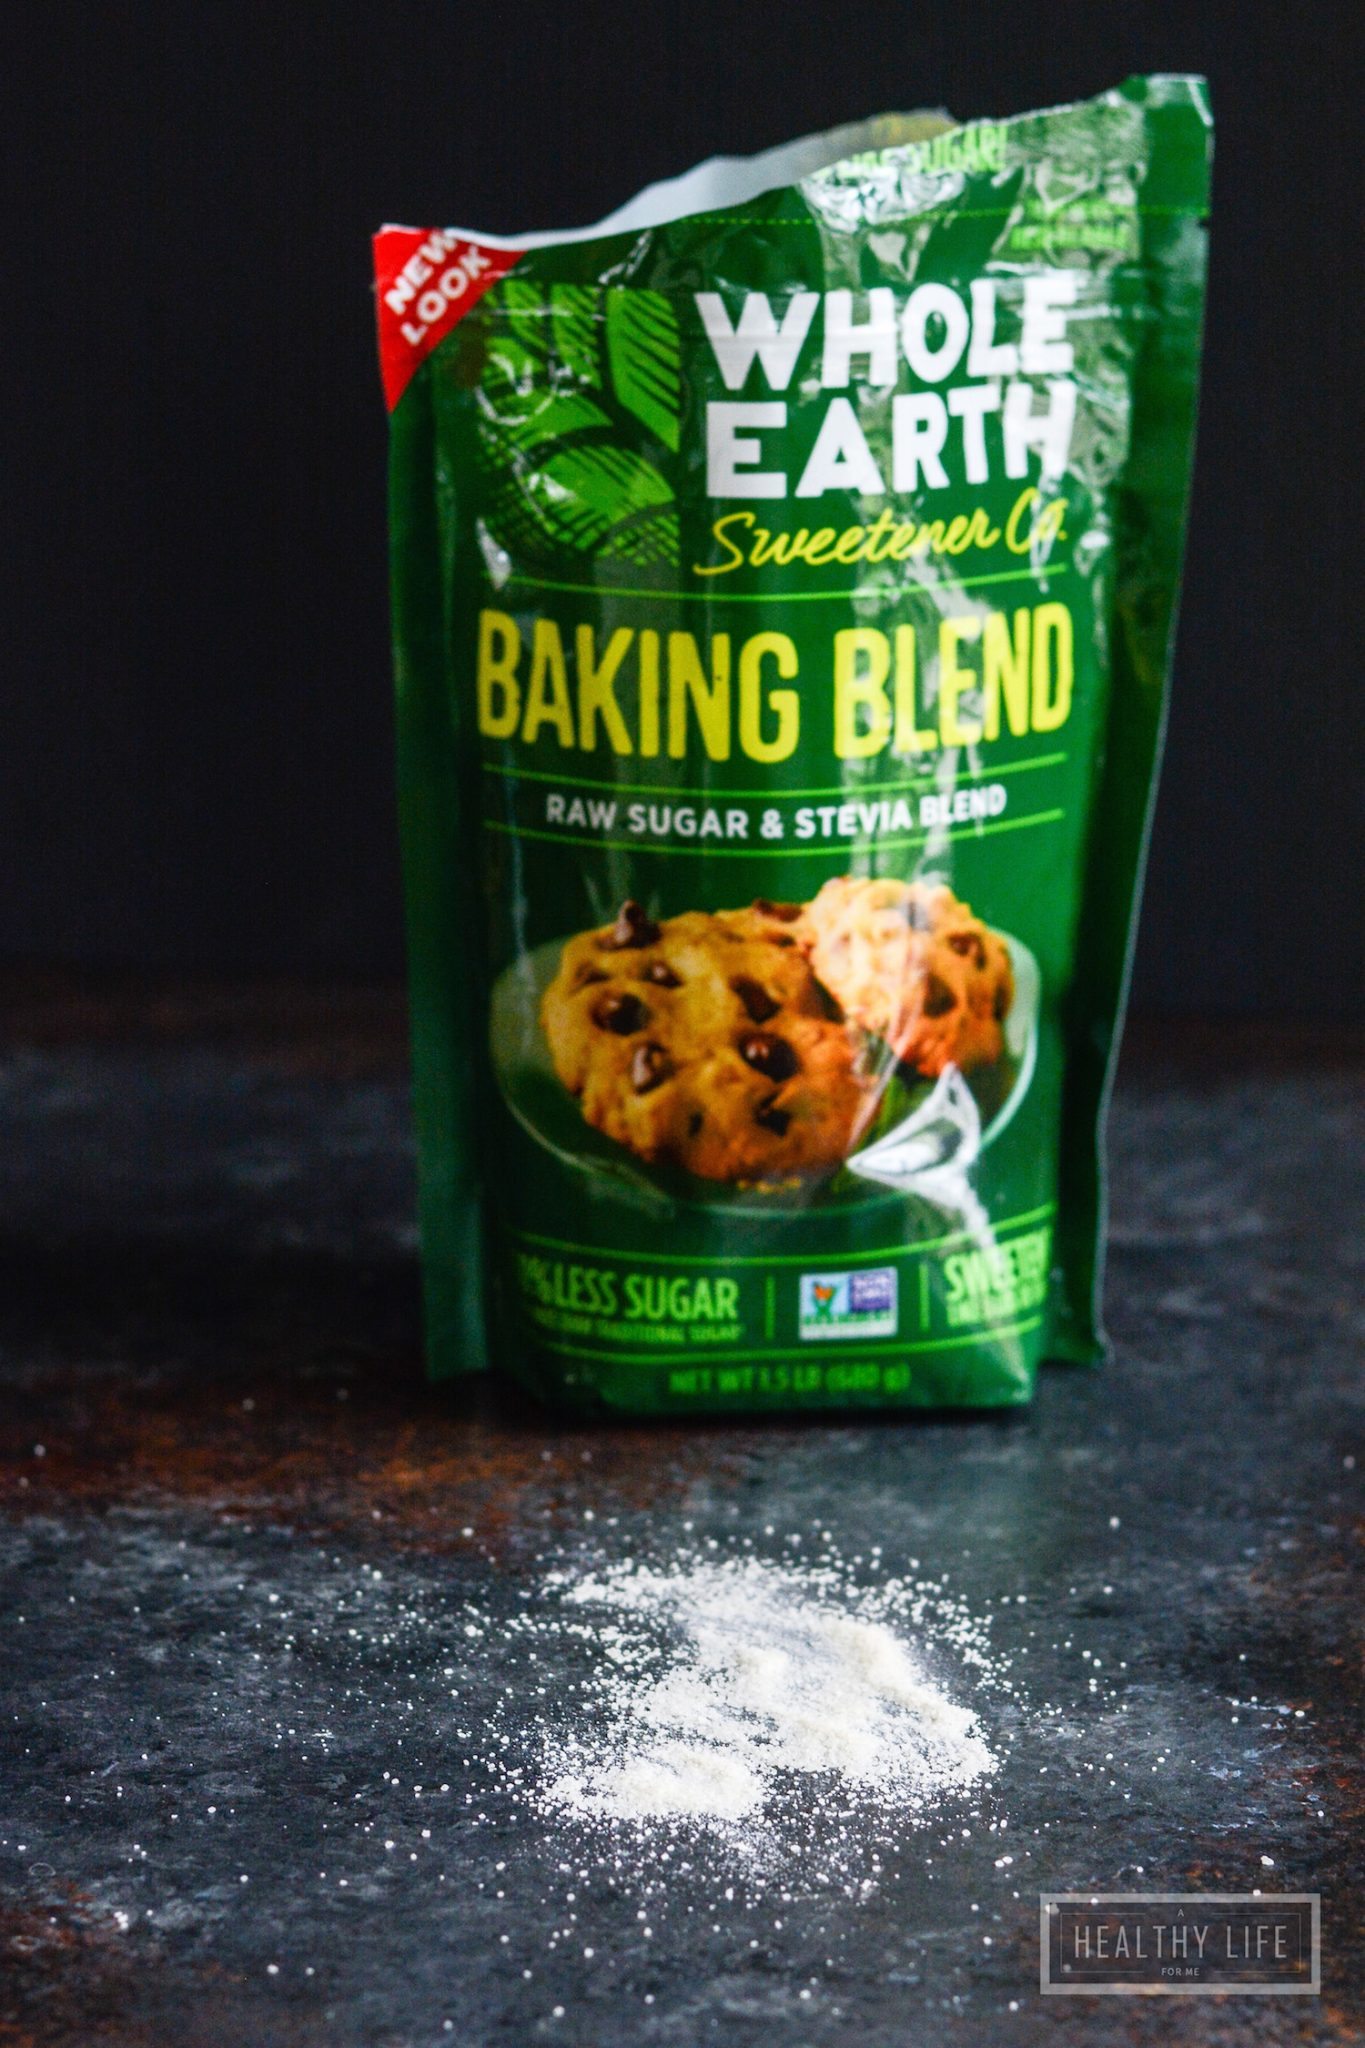 Whole Earth Sweetener Company's raw sugar and stevia baking blend sitting on a kitchen countertop